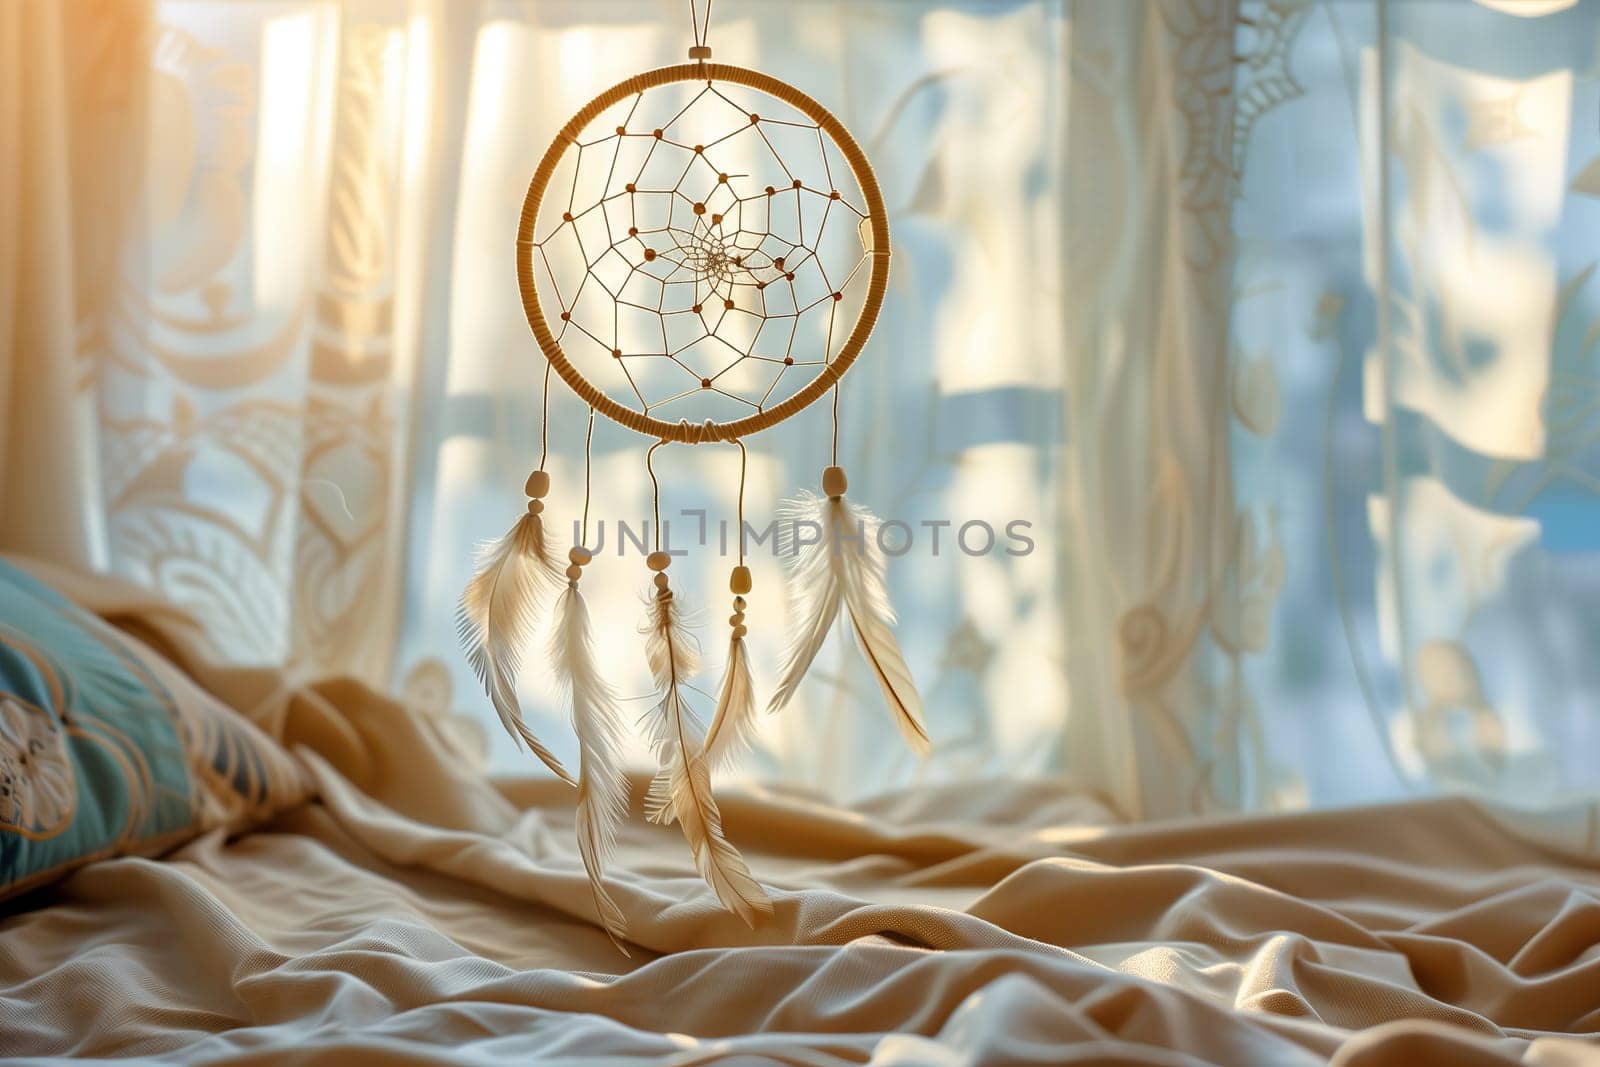 A wooden dream catcher hangs elegantly on a twig in front of a window, adding an artistic touch to the rooms interior design with glass drinkware, linens, and flooring